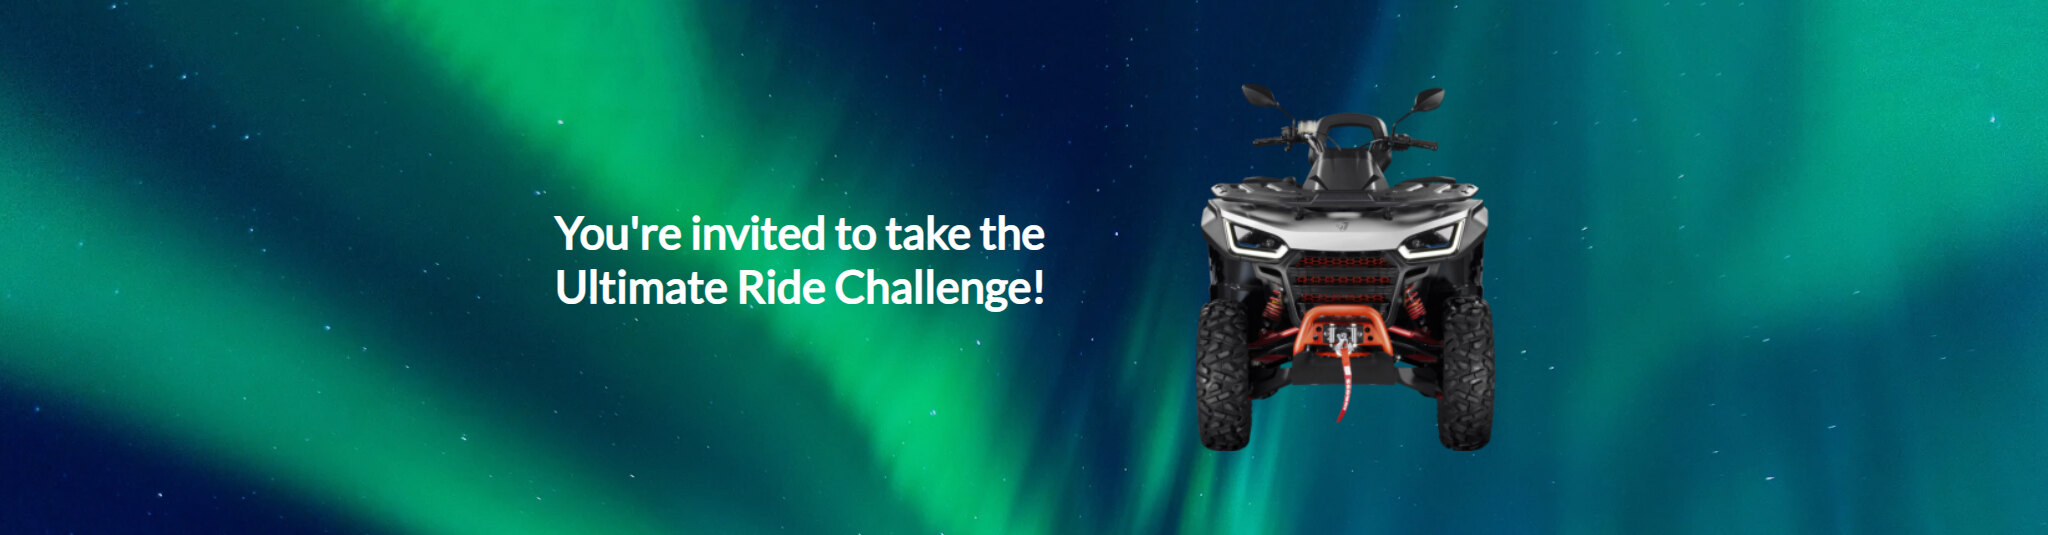 Ultimate Ride Challenge